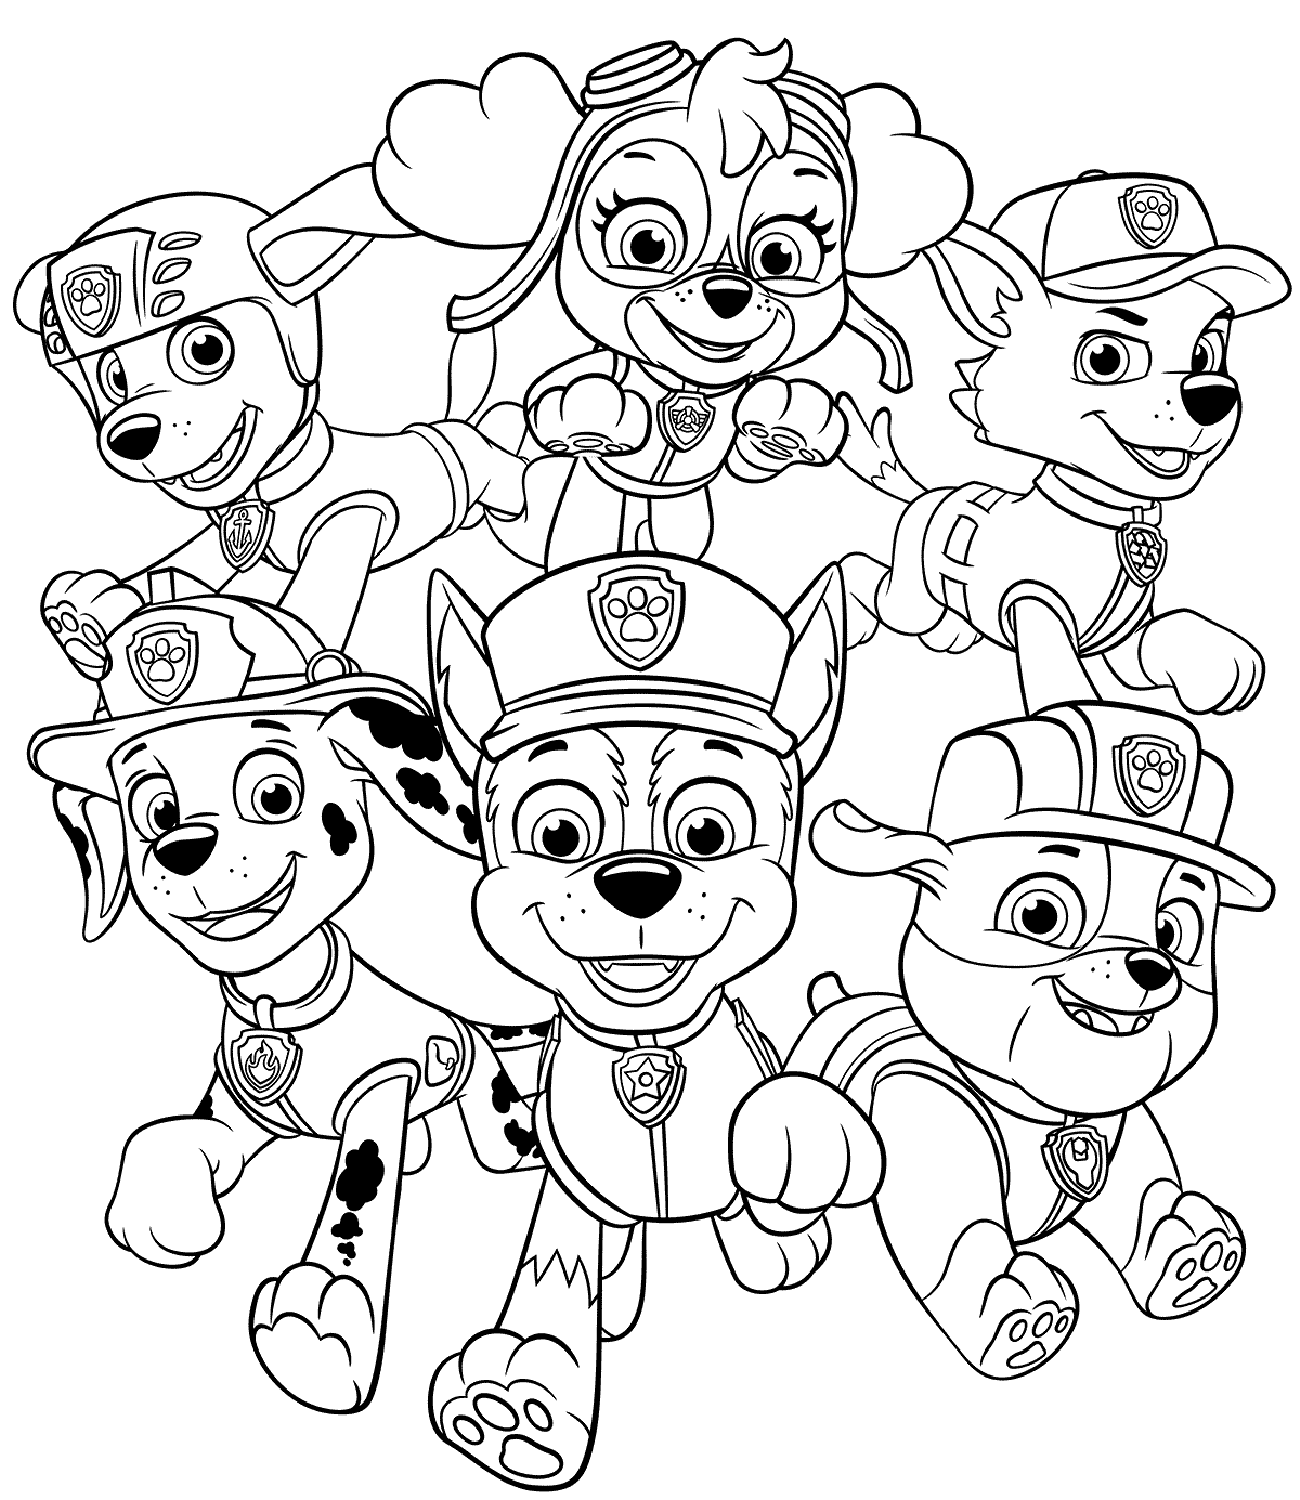 Rubble and his friends in Paw Patrol Coloring Page - Free Printable Coloring  Pages for Kids